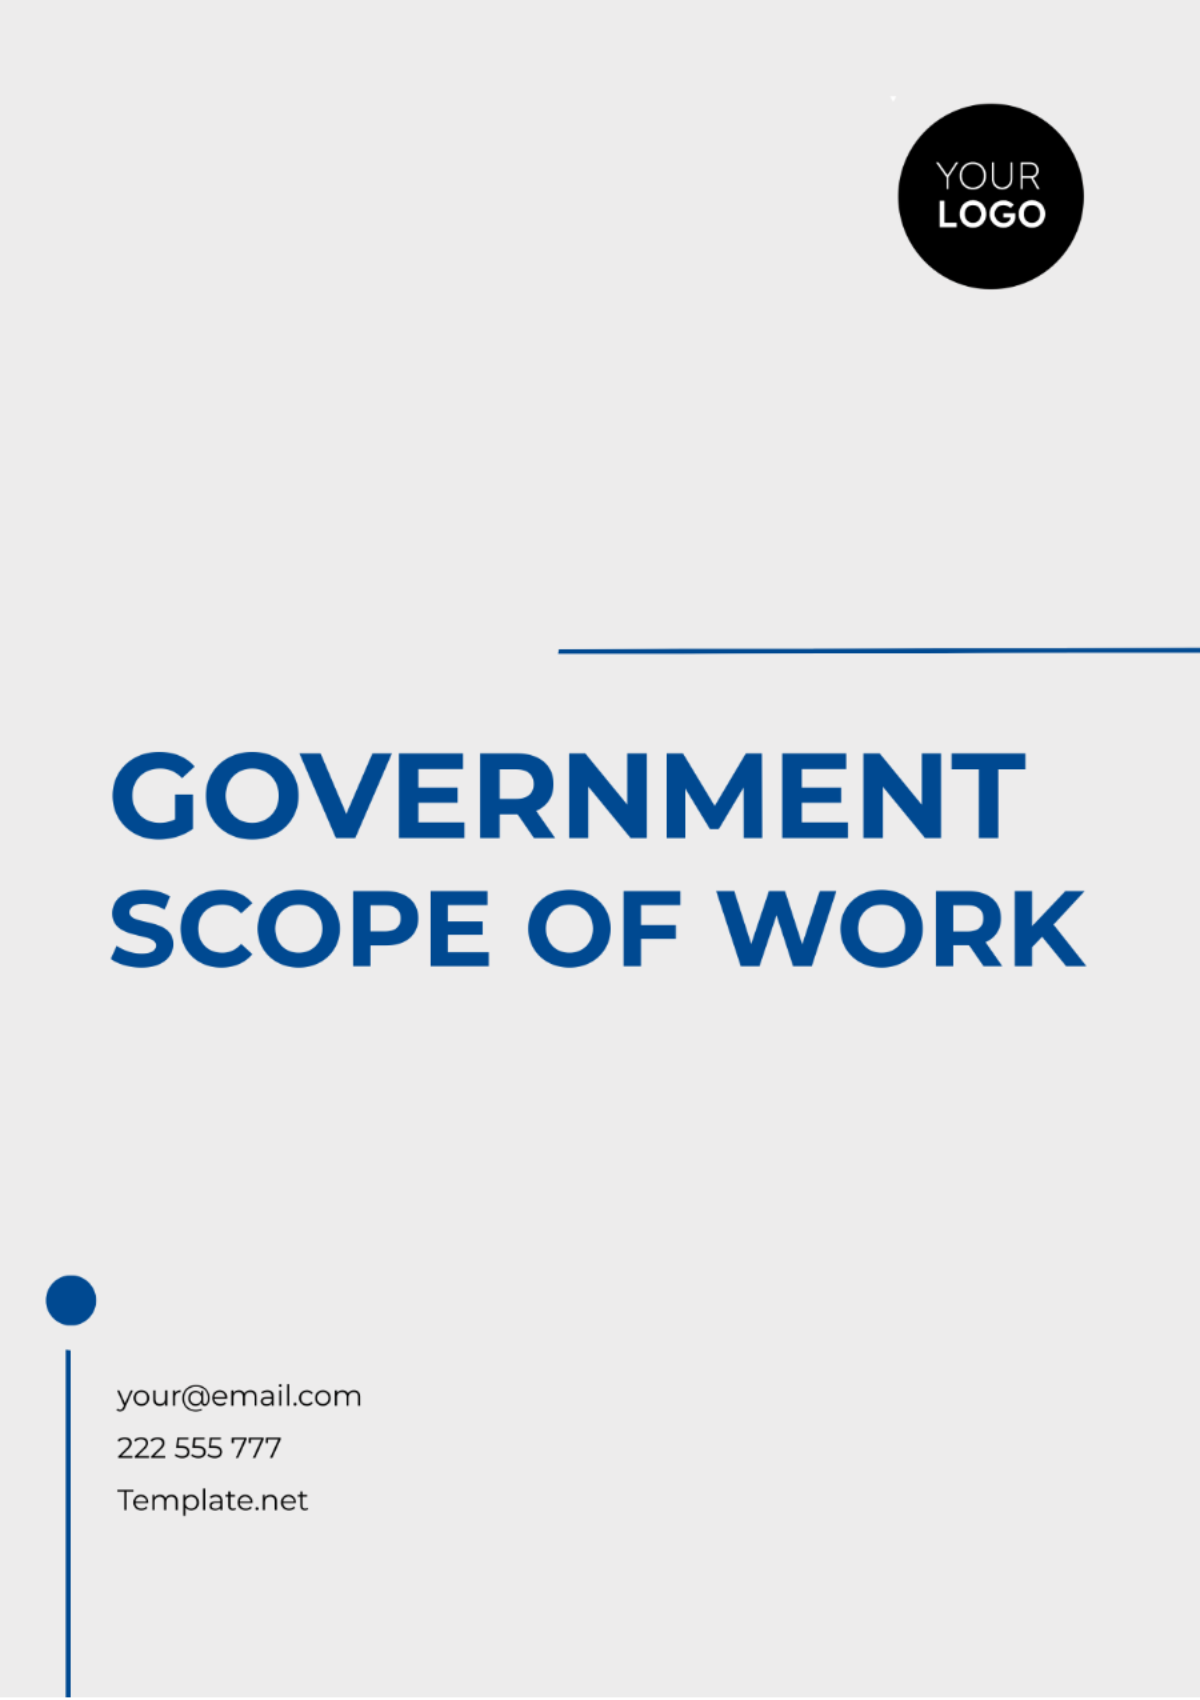 Government Scope of Work Template